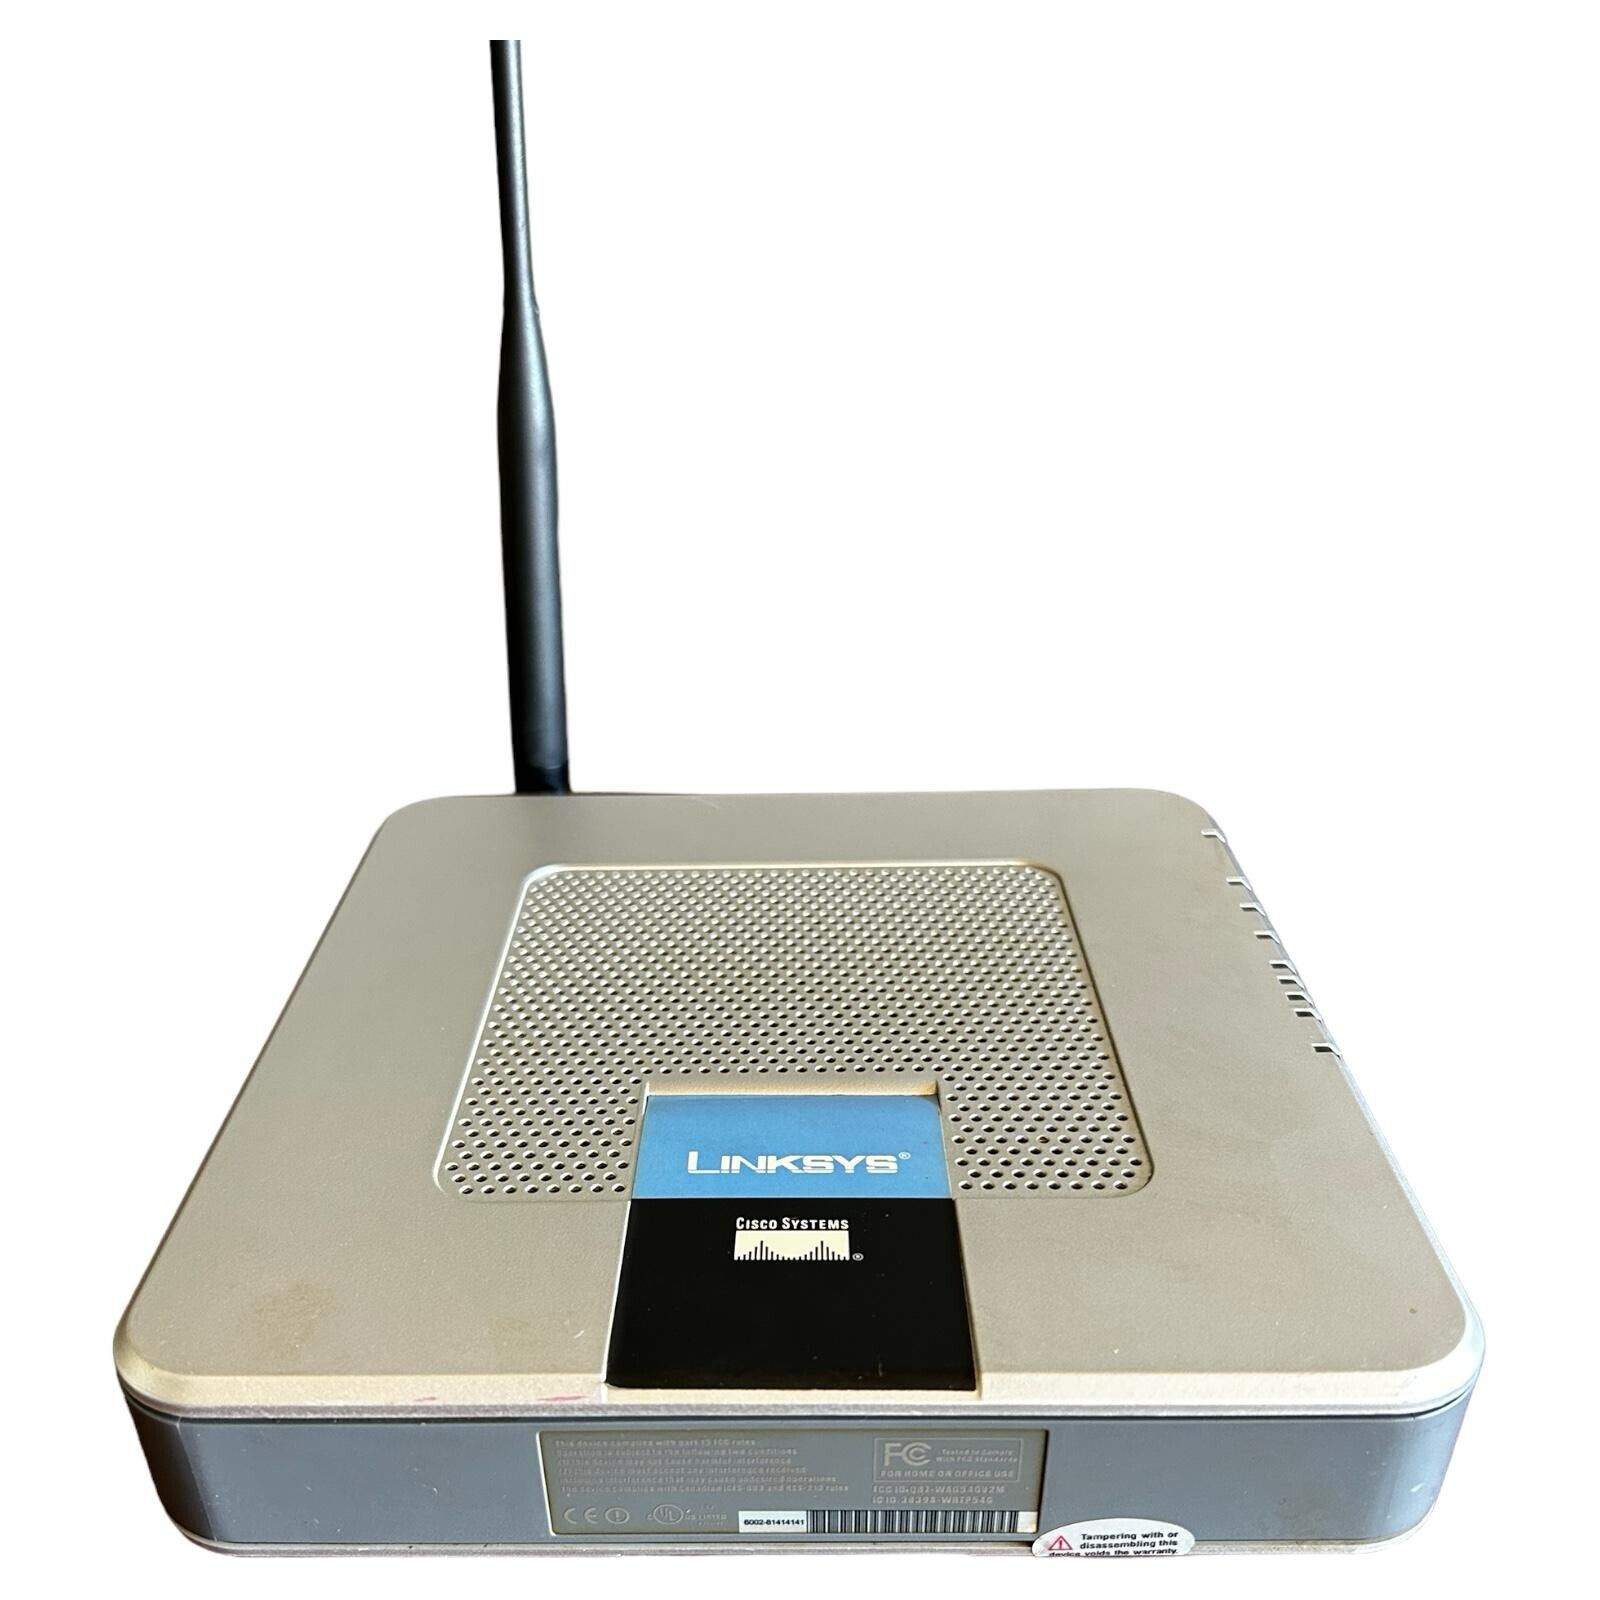 Cisco Linksys Wireless-G  Broadband Router with 2 Phone Ports WRTP54G